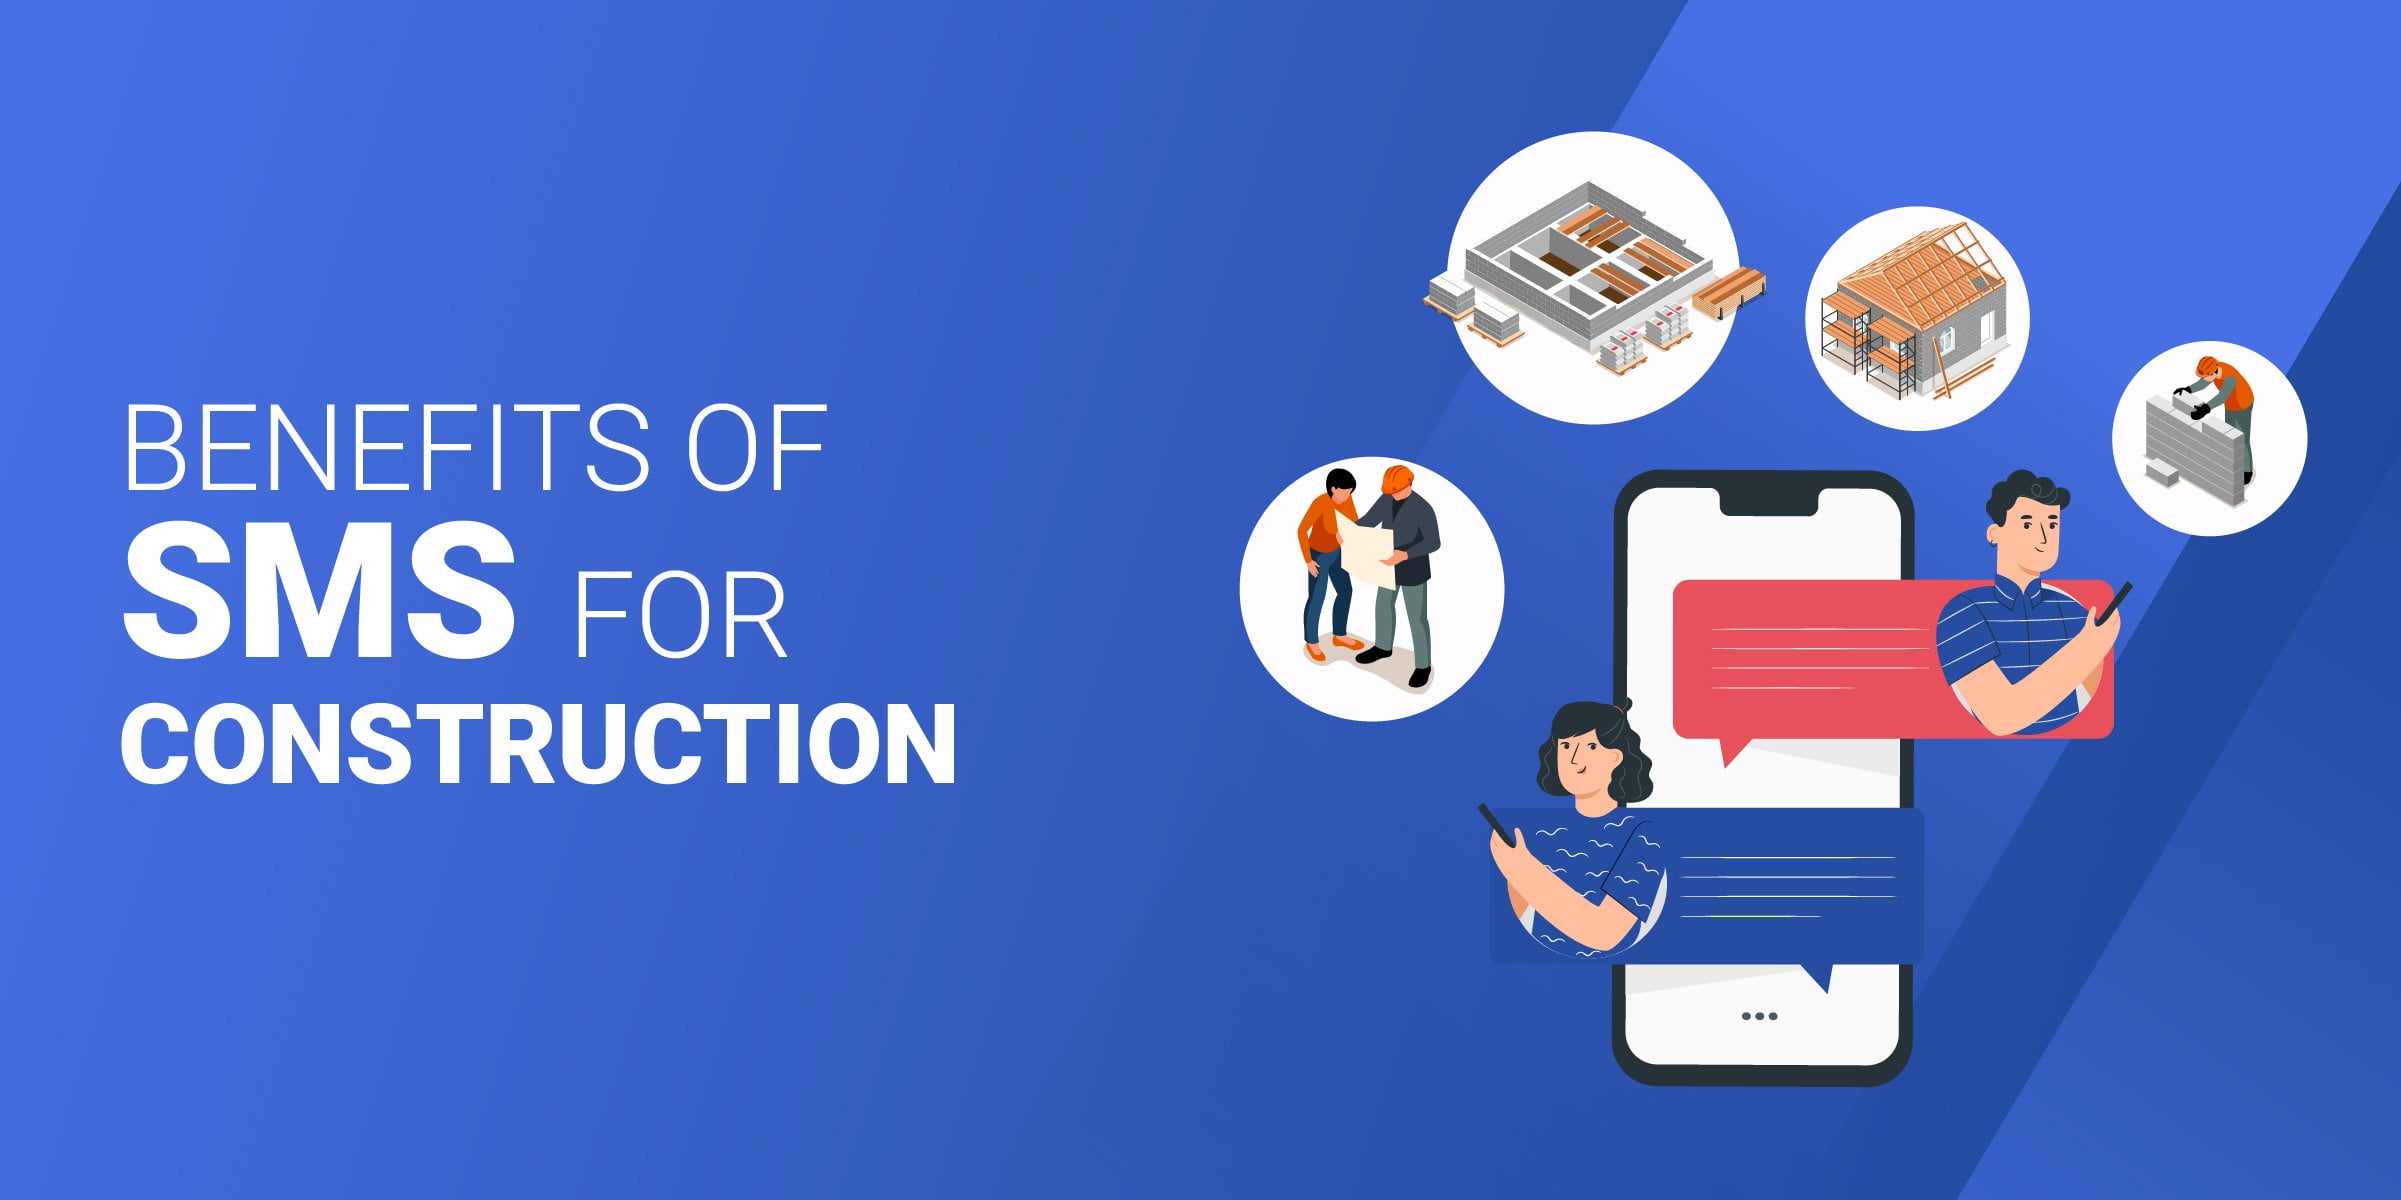 Benefits of SMS for Construction